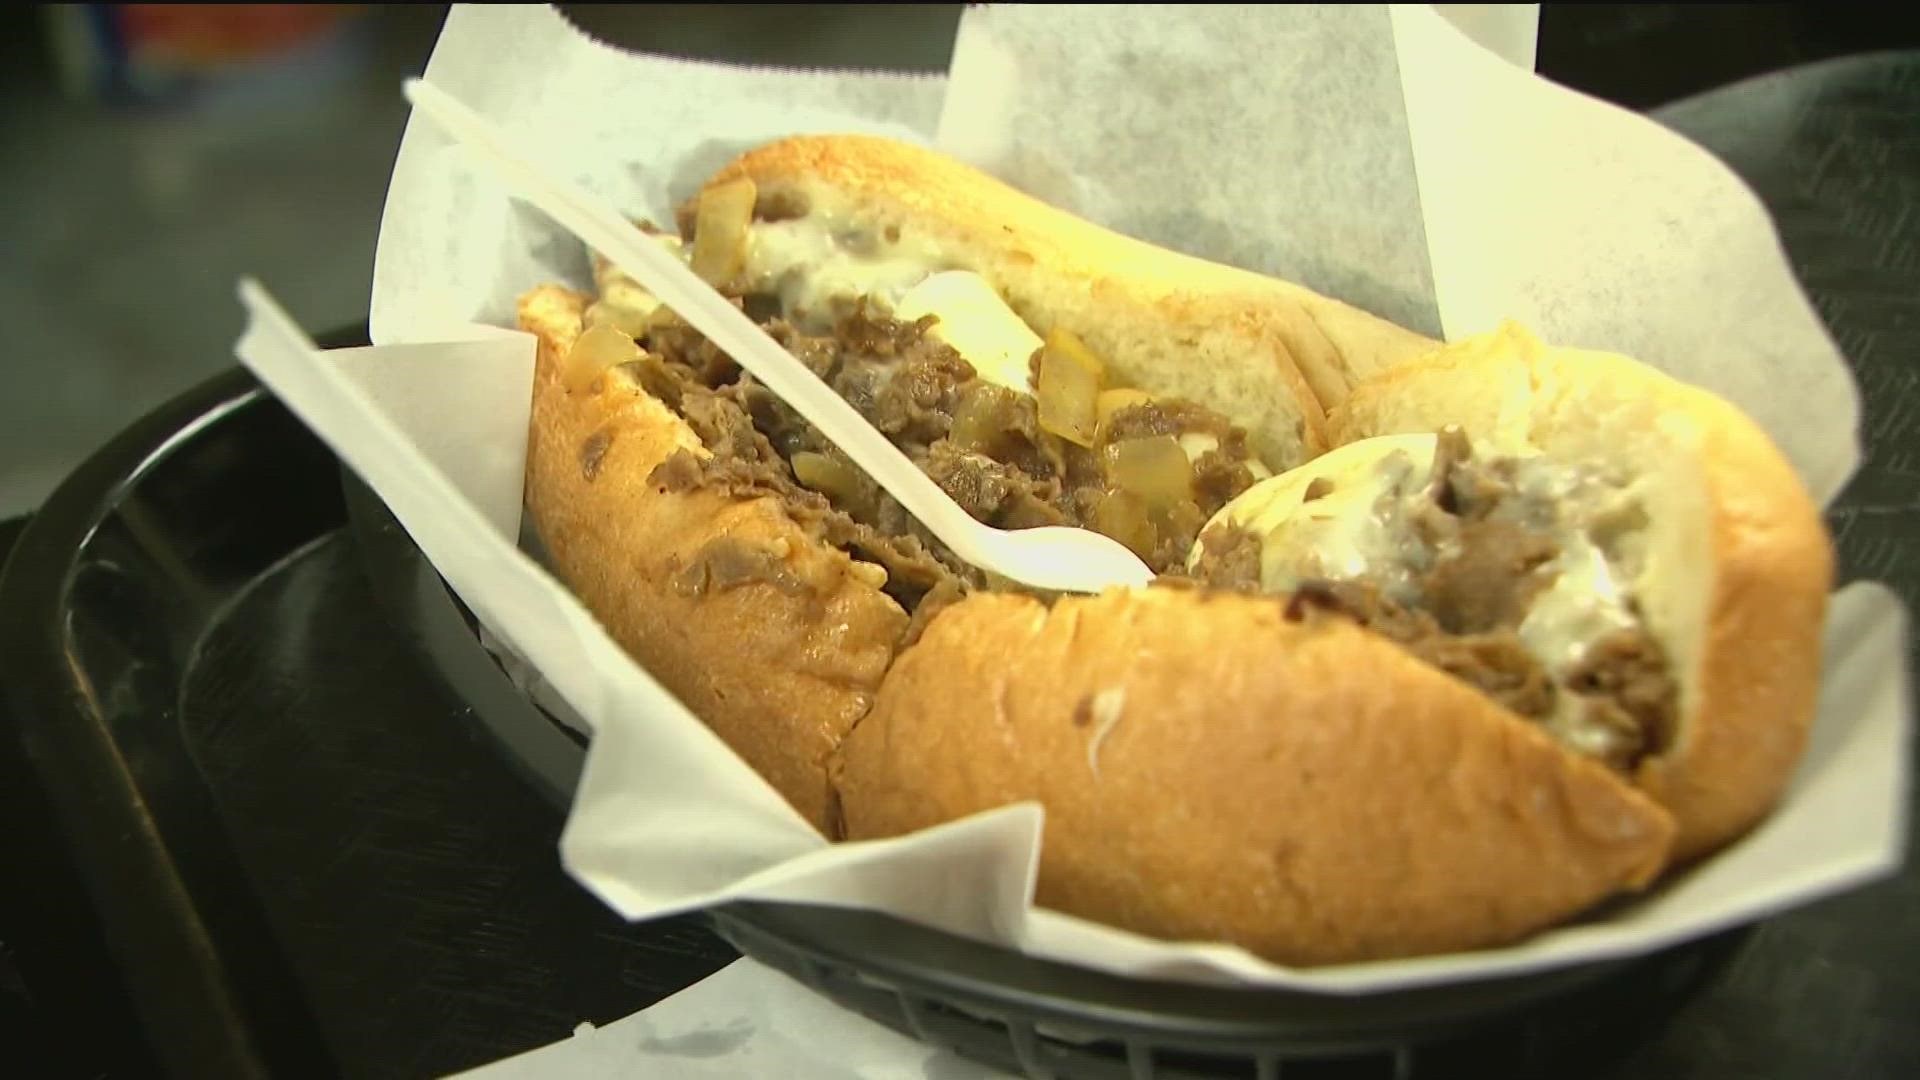 CBS 8 went out to Philadelphia Sandwich Company, where the cheesesteaks are authentic and Phillies fans feel at home. But now it may be sacrilegious to eat one.